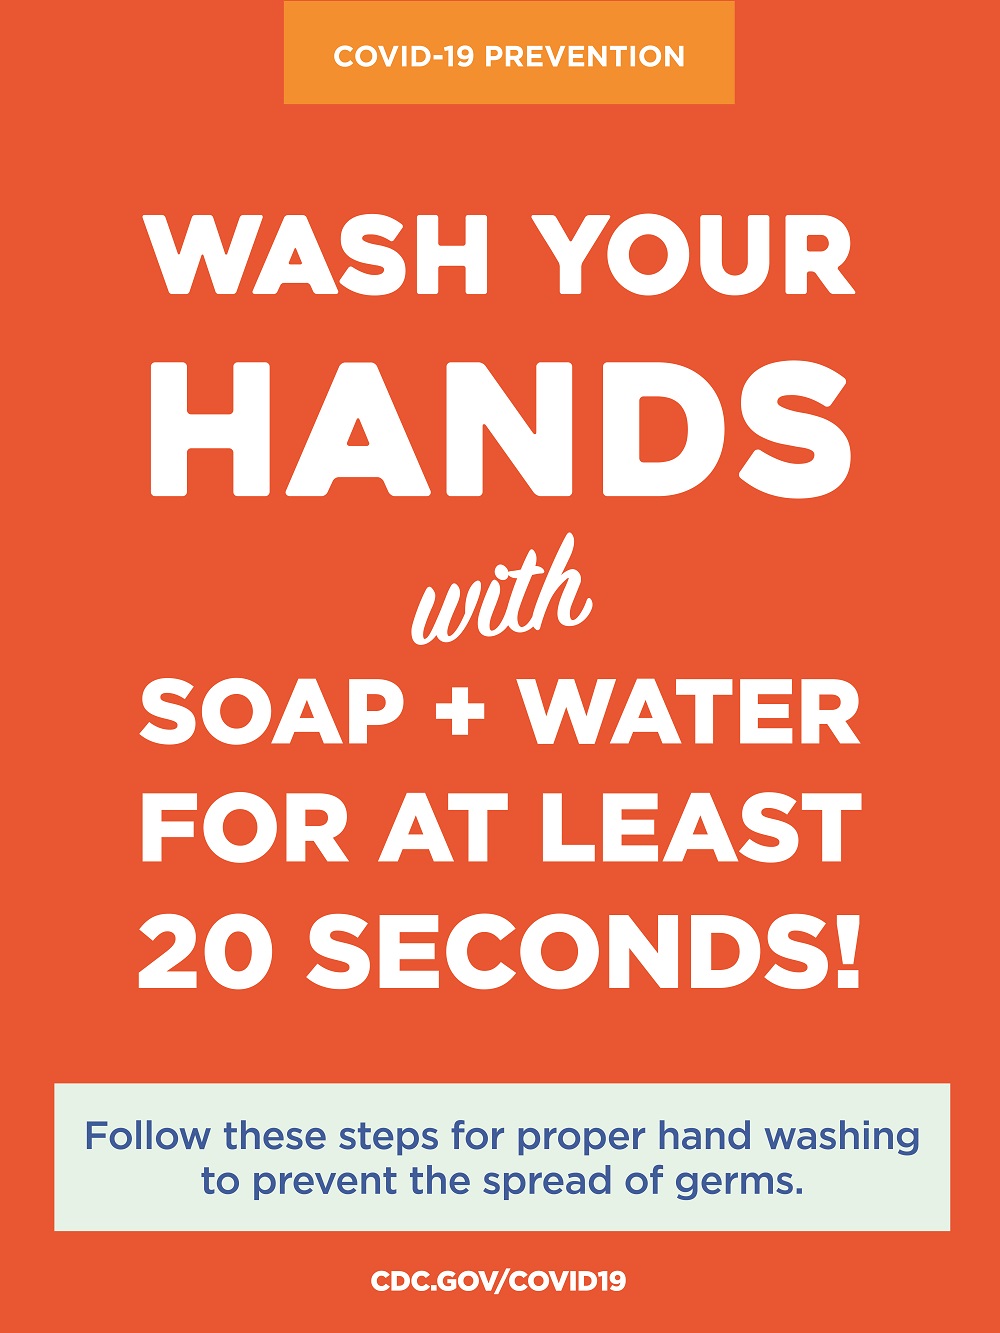 Orange Wash Your Hands Cling or Decal Set of 2 - 8.5 x 11"